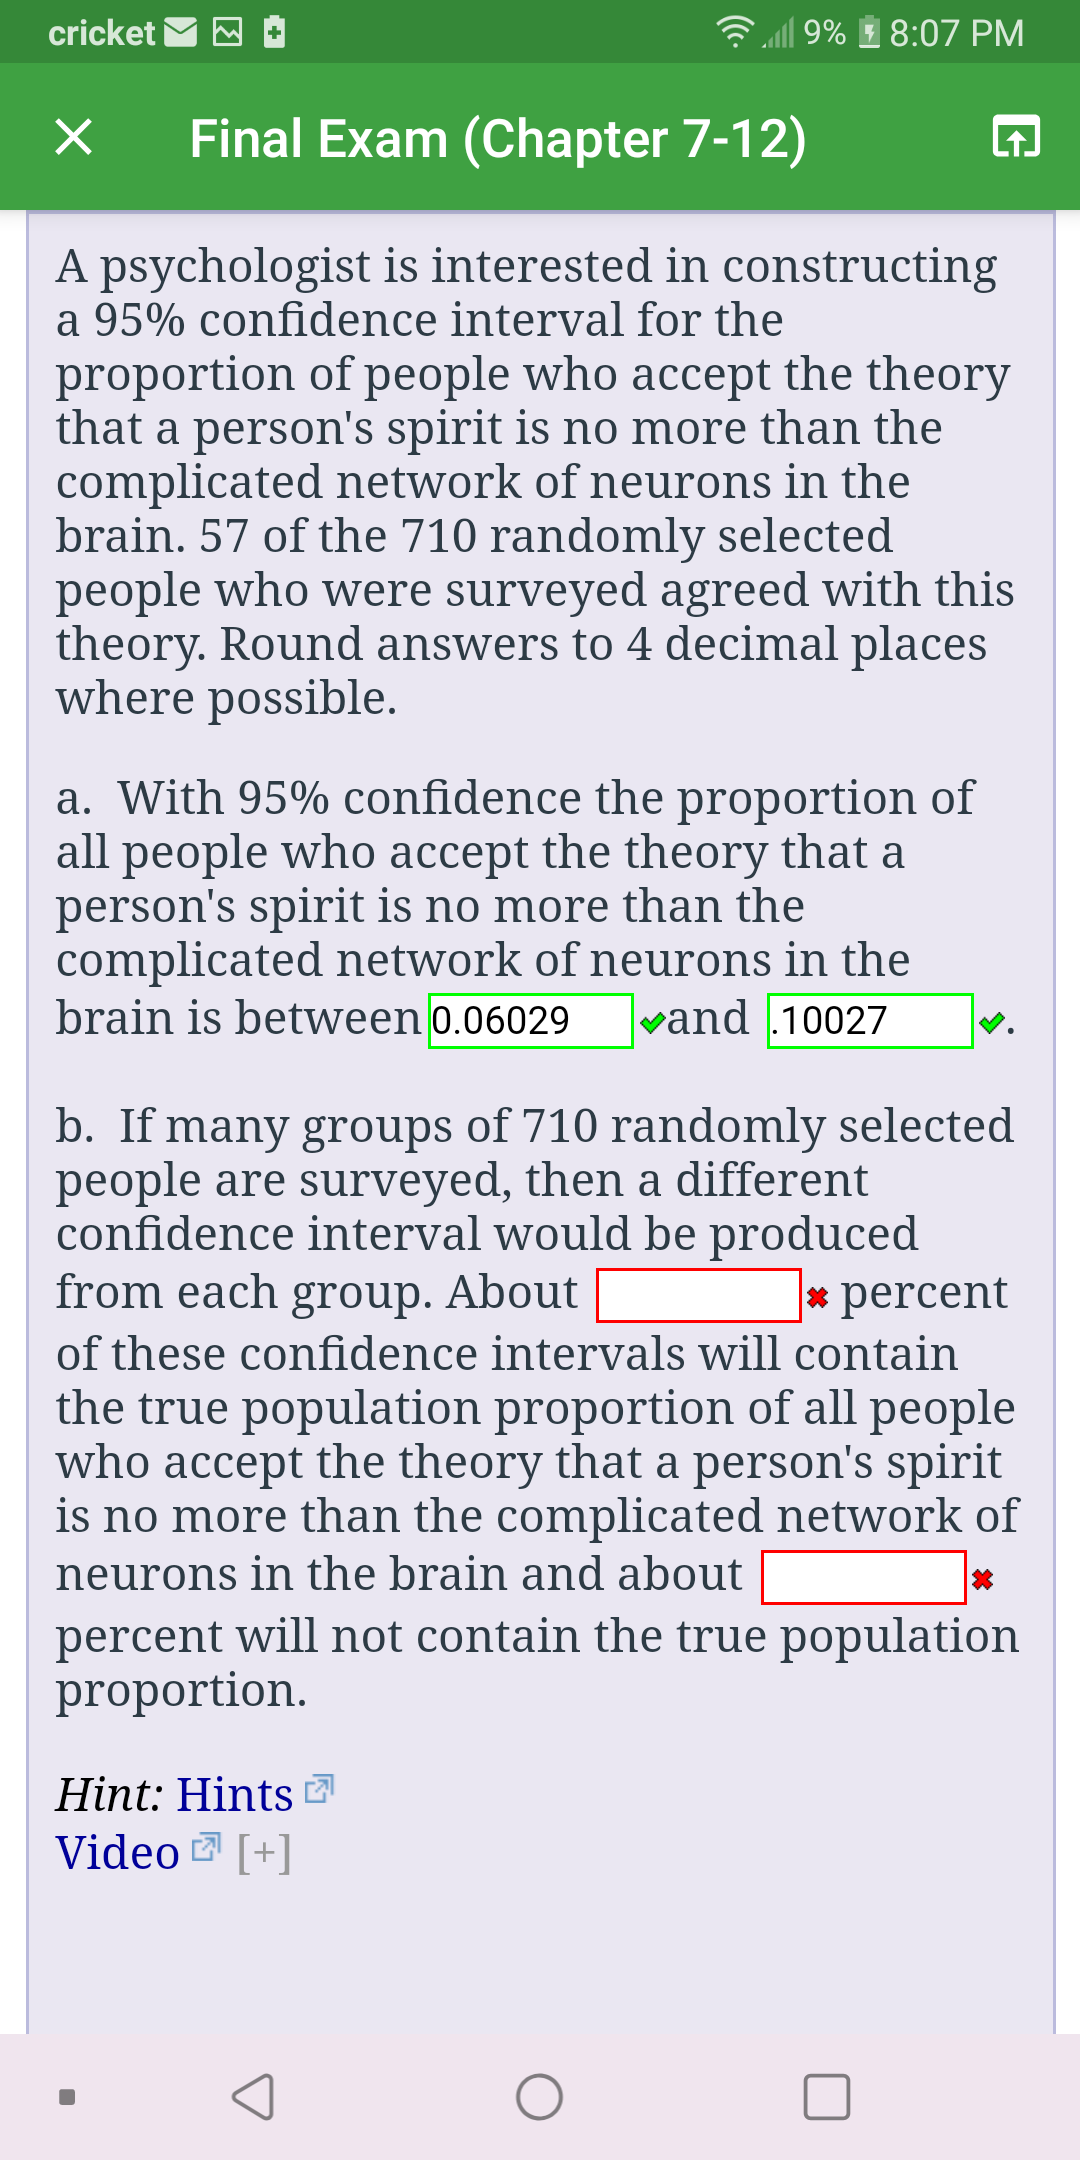 l| 9%
cricket
8:07 PM
Final Exam (Chapter 7-12)
A psychologist is interested in constructing
a 95% confidence interval for the
proportion of people who accept the theory
that a person's spirit is no more than the
complicated network of neurons in the
brain. 57 of the 710 randomly selected
people who were surveyed agreed with this
theory. Round answers to 4 decimal places
where possible.
a. With 95% confidence the proportion of
all people who accept the theory that a
person's spirit is no more than the
complicated network of neurons in the
brain is between 0.06029
vand .10027
b. If many groups of 710 randomly selected
people are surveyed, then a different
confidence interval would be produced
from each group. About
* percent
of these confidence intervals will contain
the true population proportion of all people
who accept the theory that a person's spirit
is no more than the complicated network of
neurons in the brain and about
percent will not contain the true population
proportion.
Hint: Hints
Video [+]
